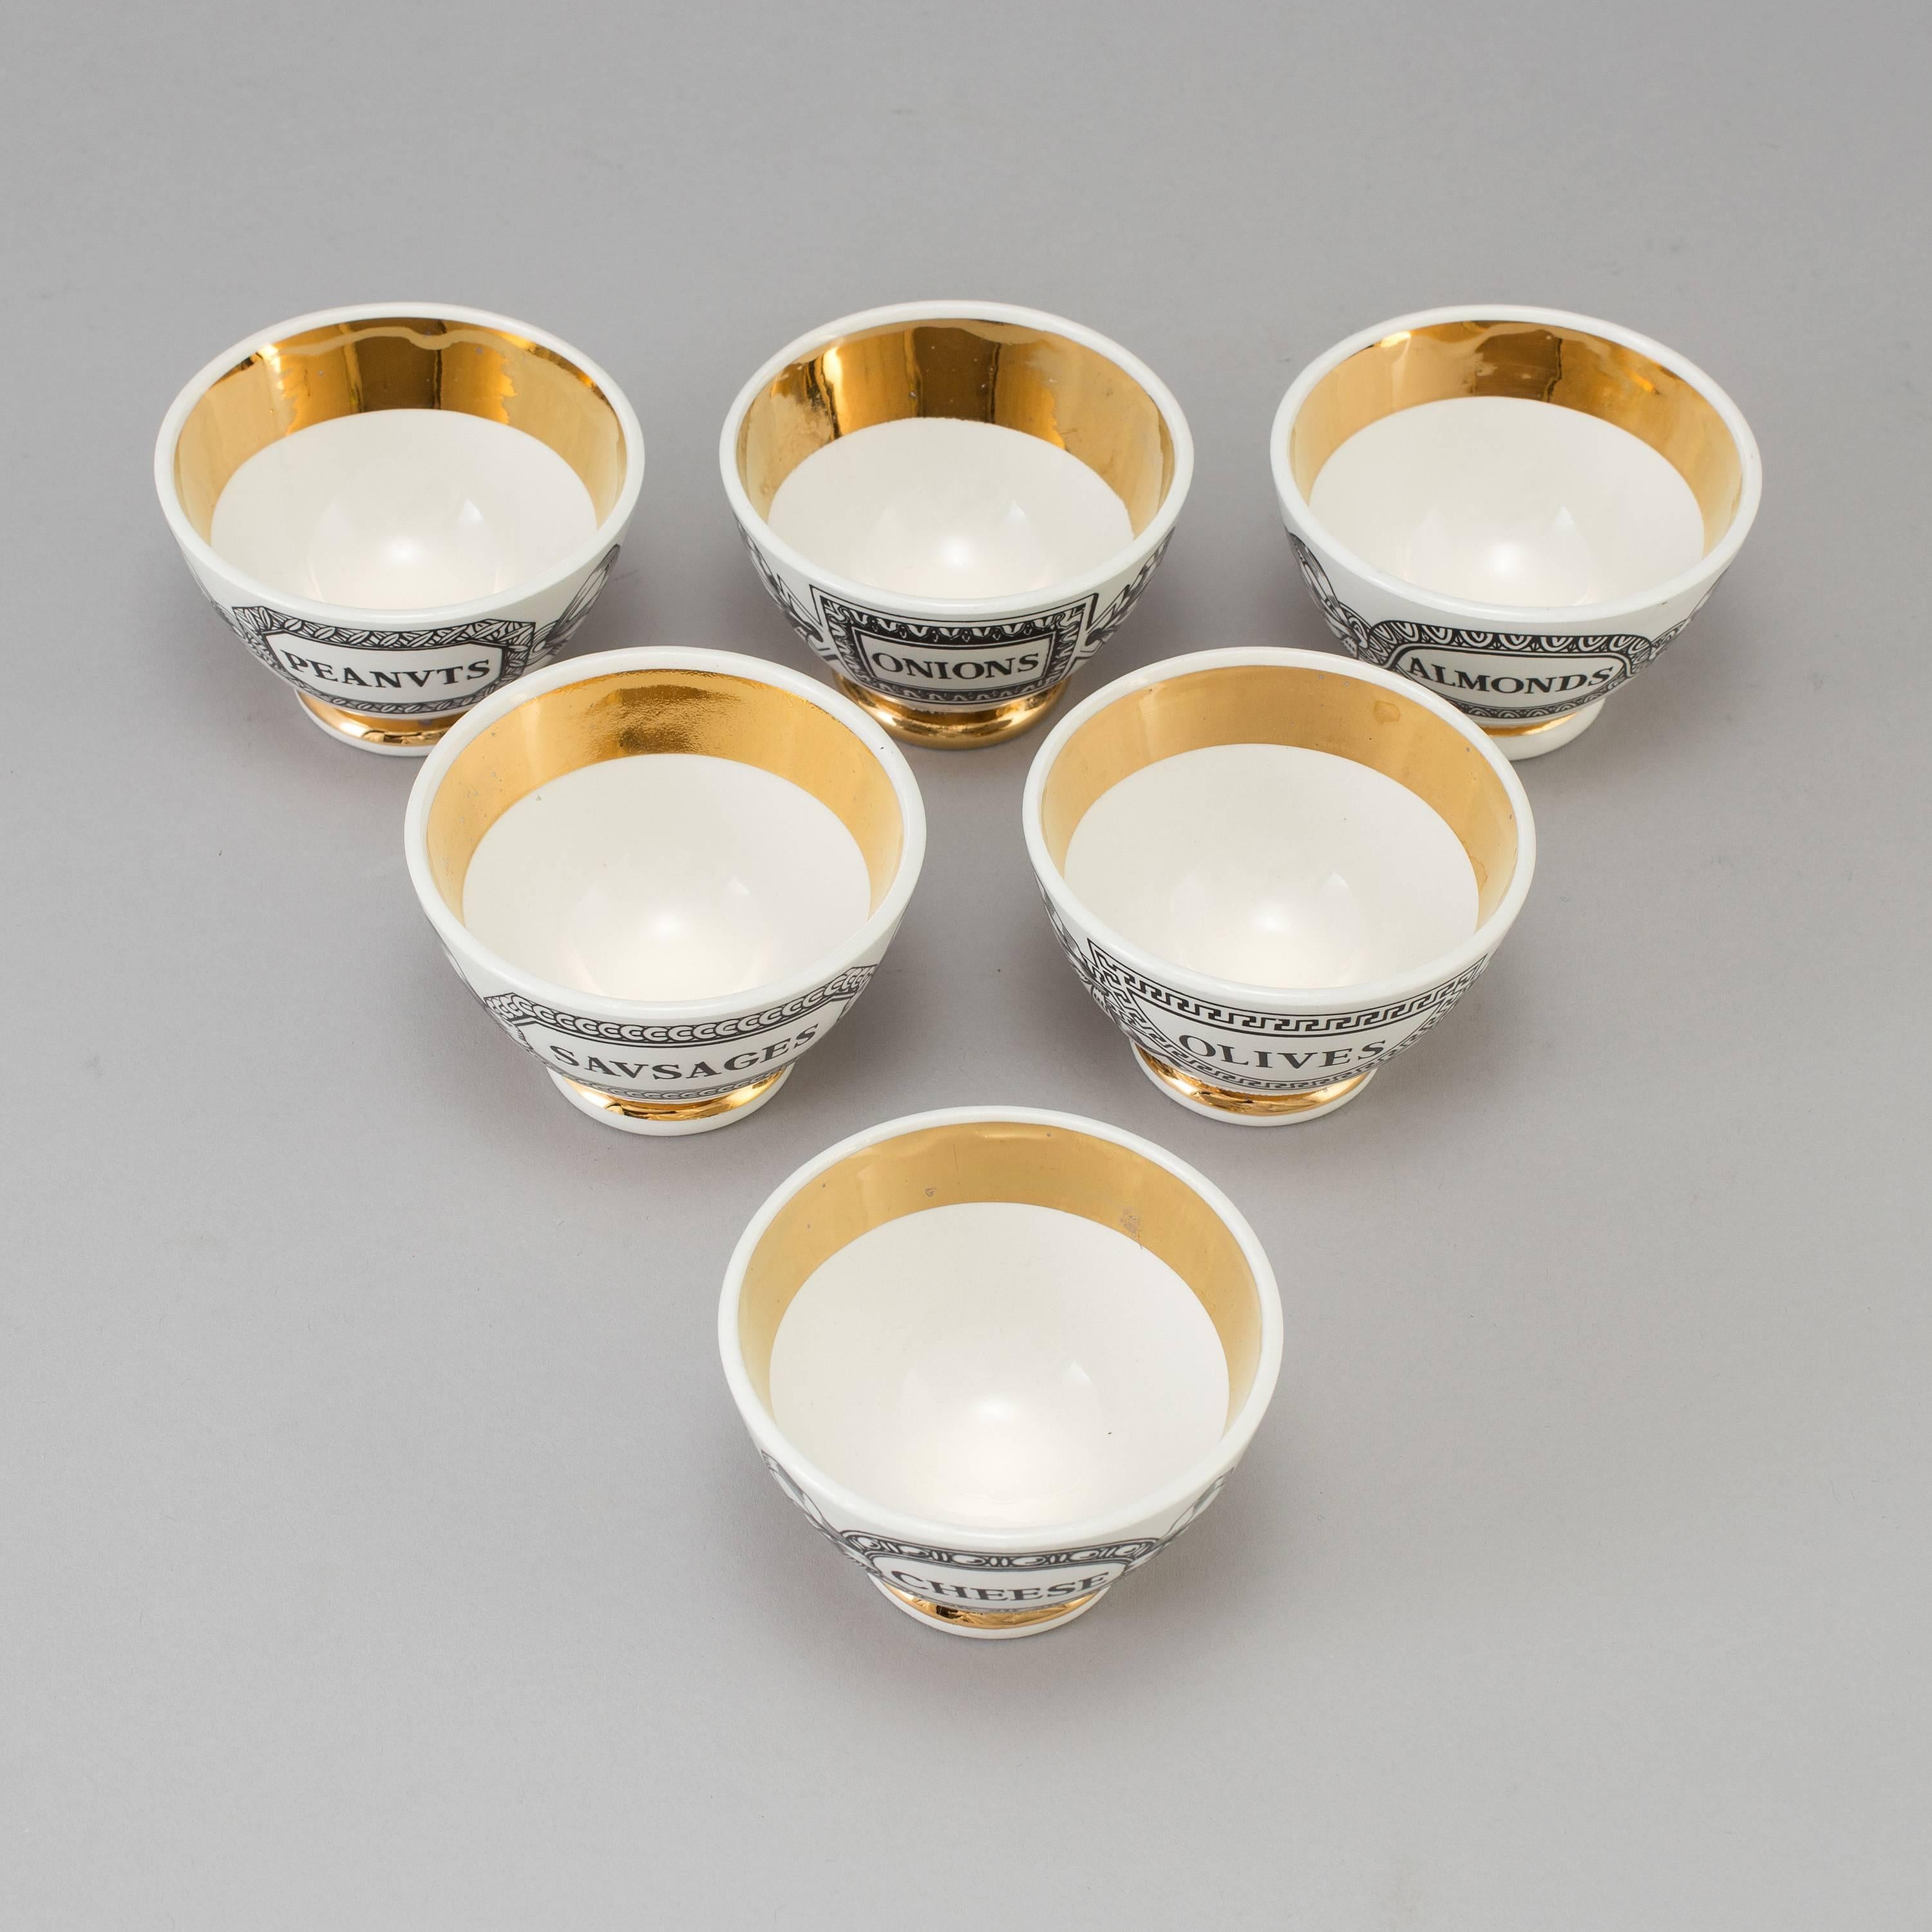 Italian Piero Fornasetti Set of Six Bar Snack Bowls or Appetizer Bowls, 1960s